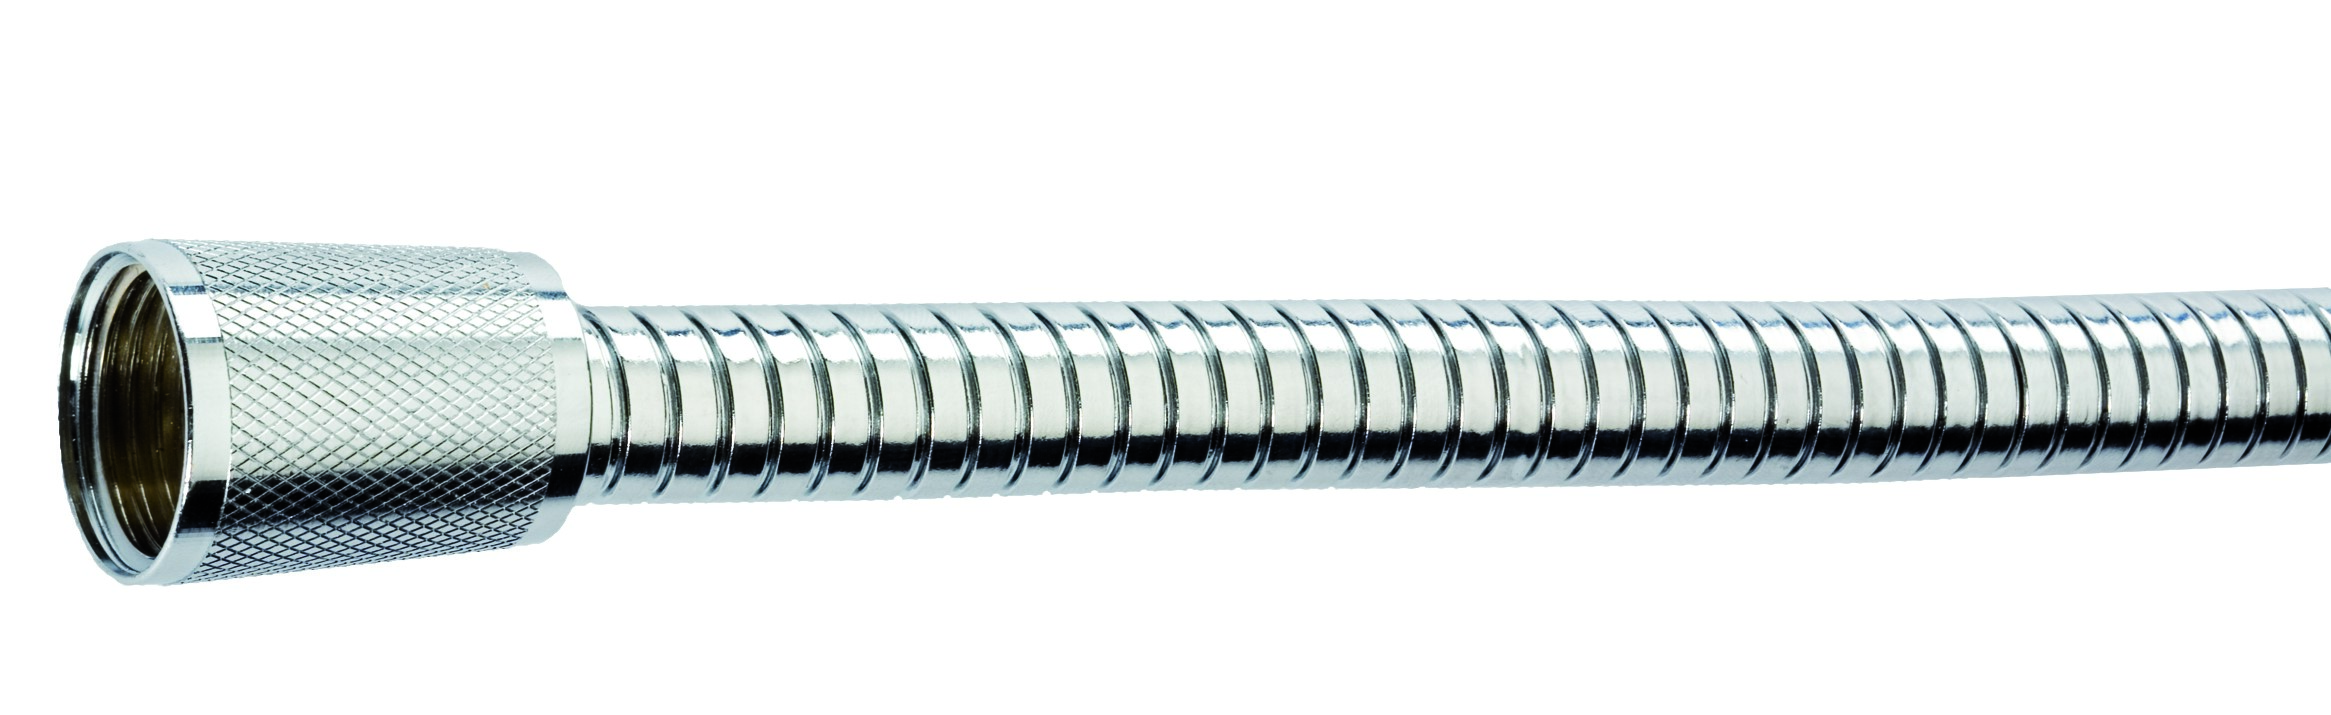 Shower hose double agraff, stainless steel